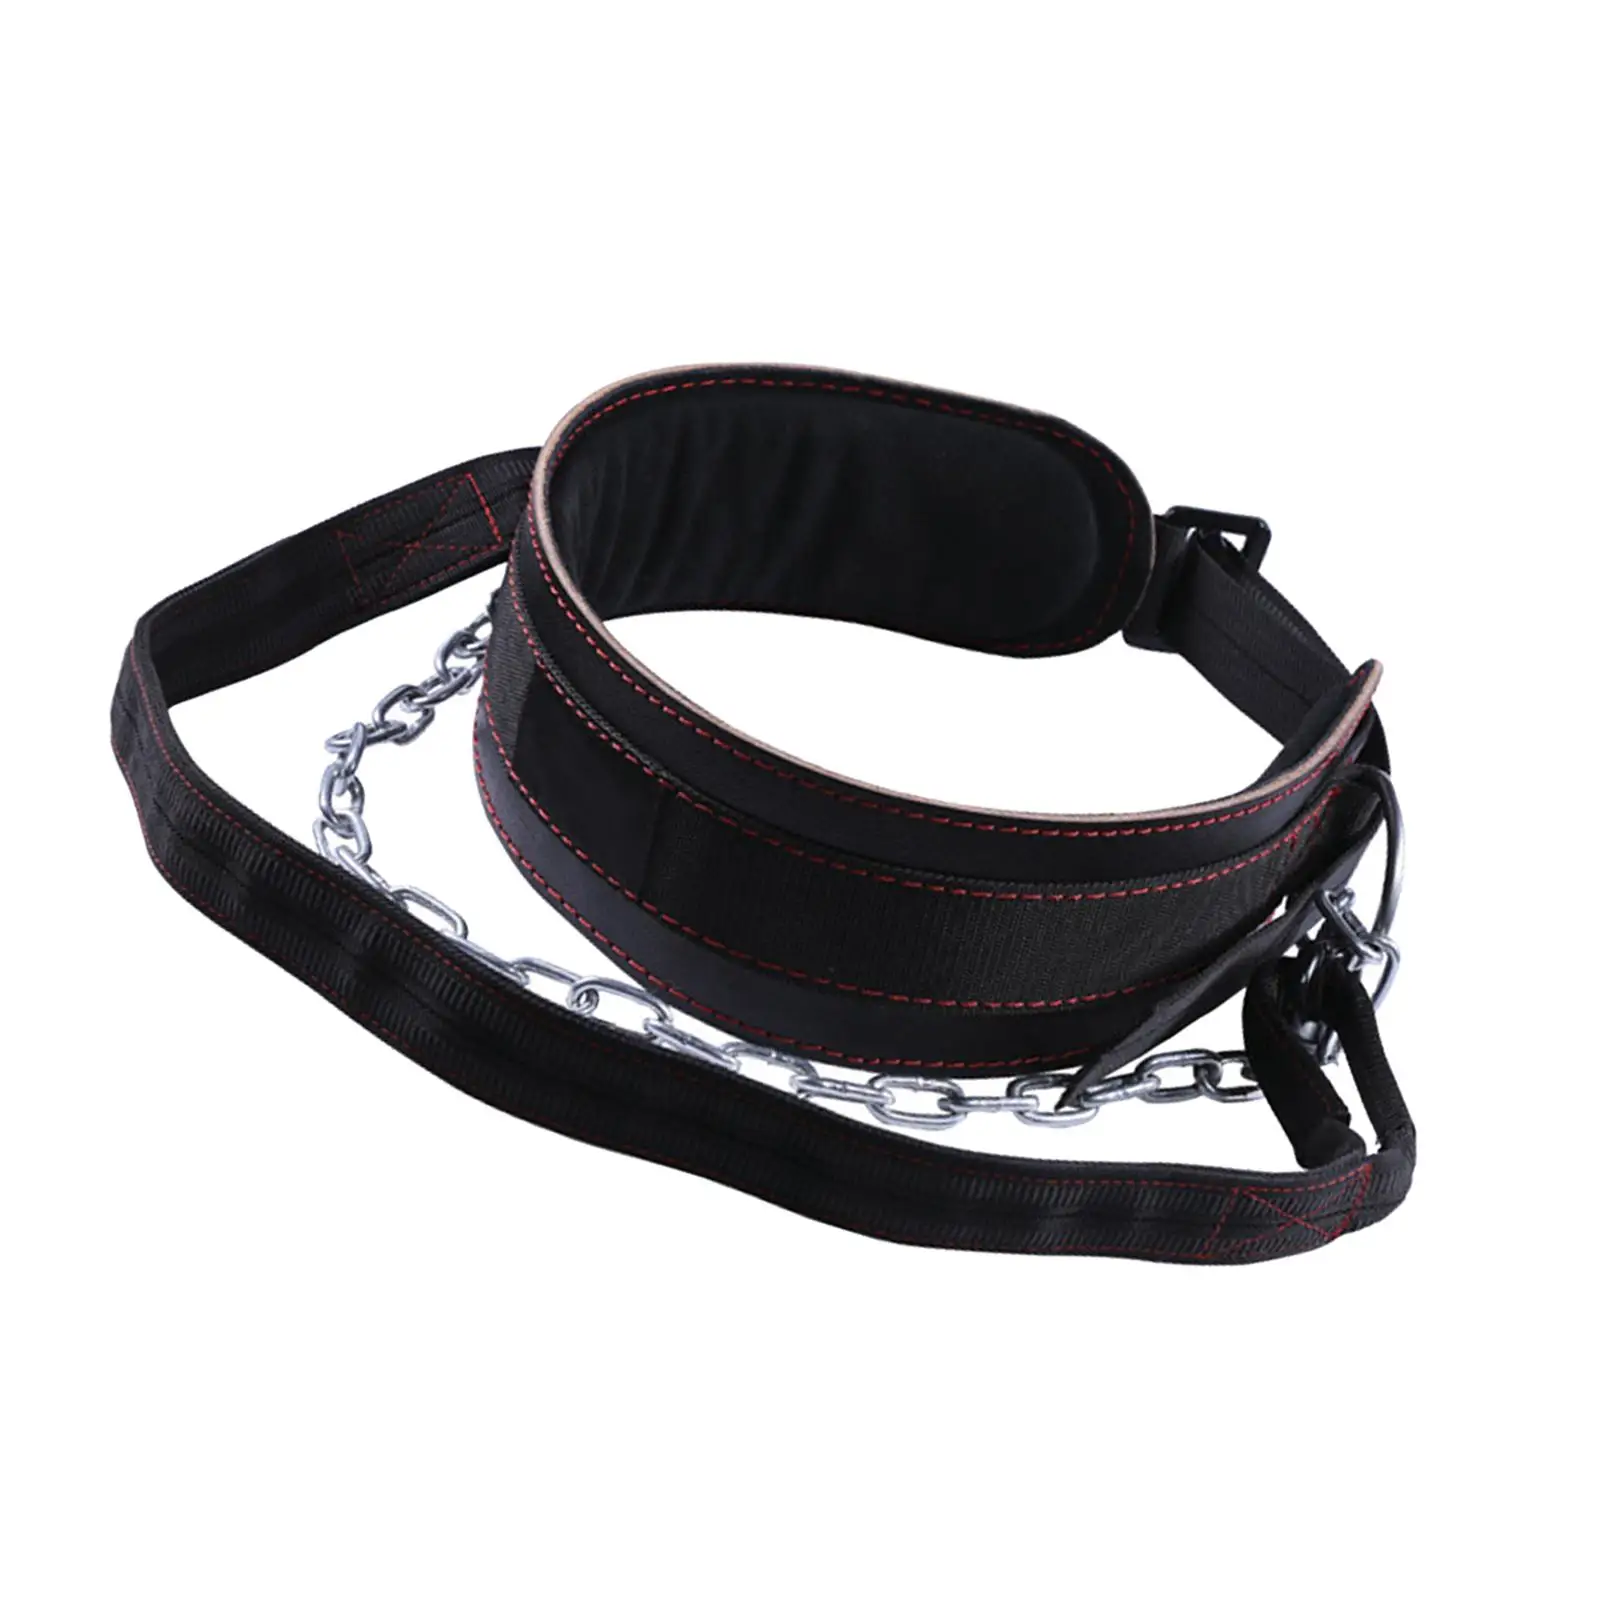 PU Dip Belt with Lifting Chain with Buckle Spandex Comfort Comfortable Waist Support Chin Dips Weight Belt for Strength Training